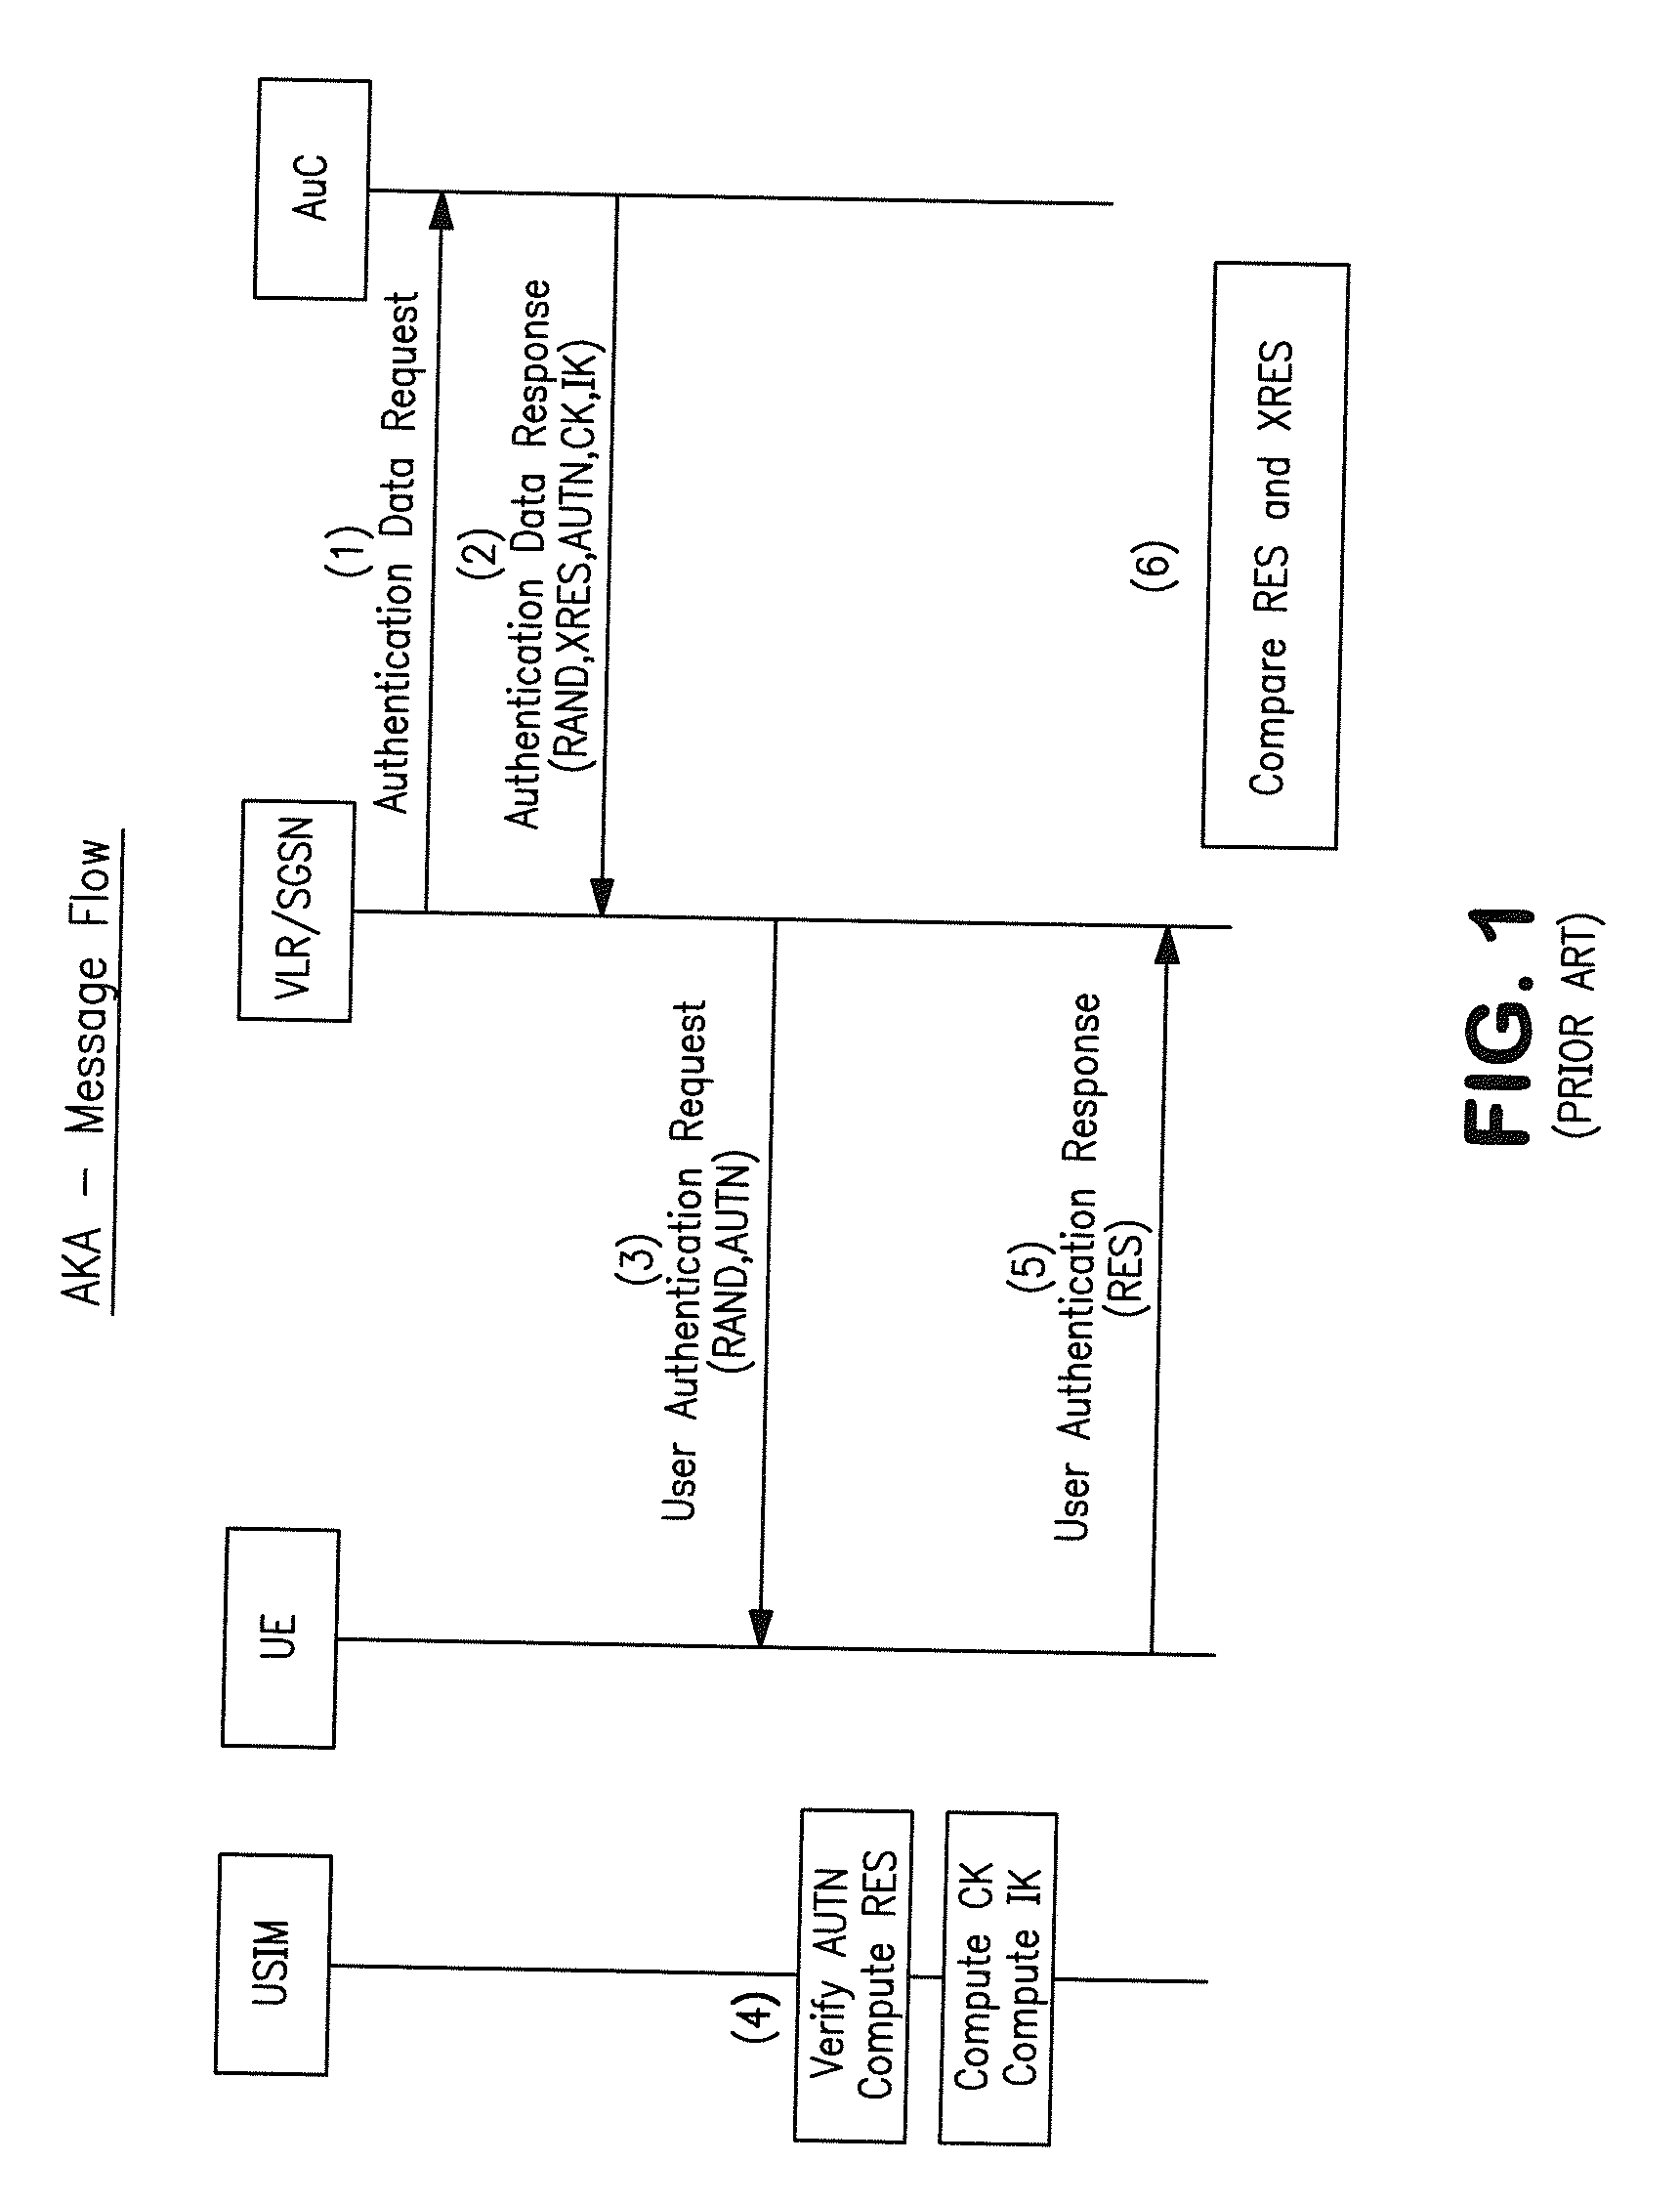 Apparatus and methods for recordation of device history across multiple software emulations